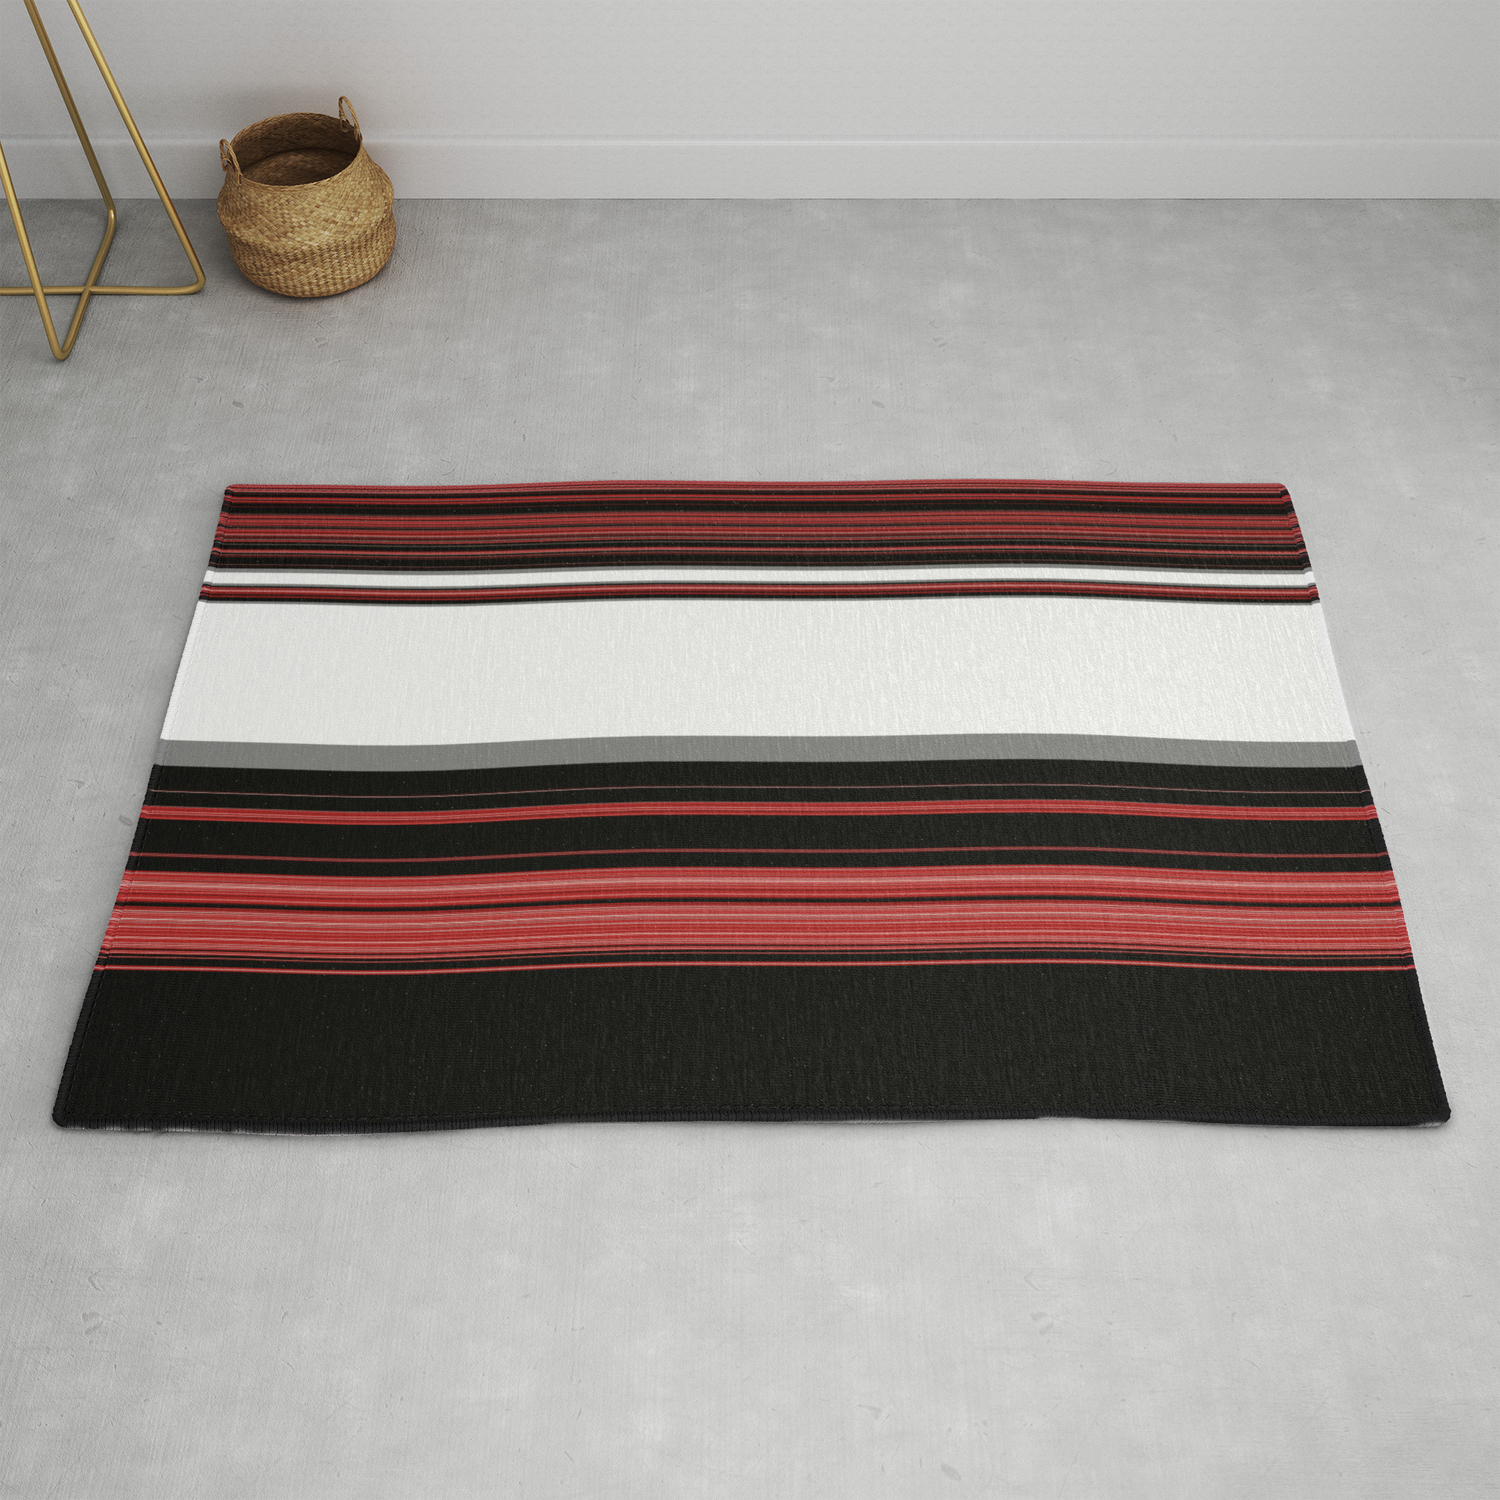 Black And White With Gray Stripes Rug, Black White Red Rug